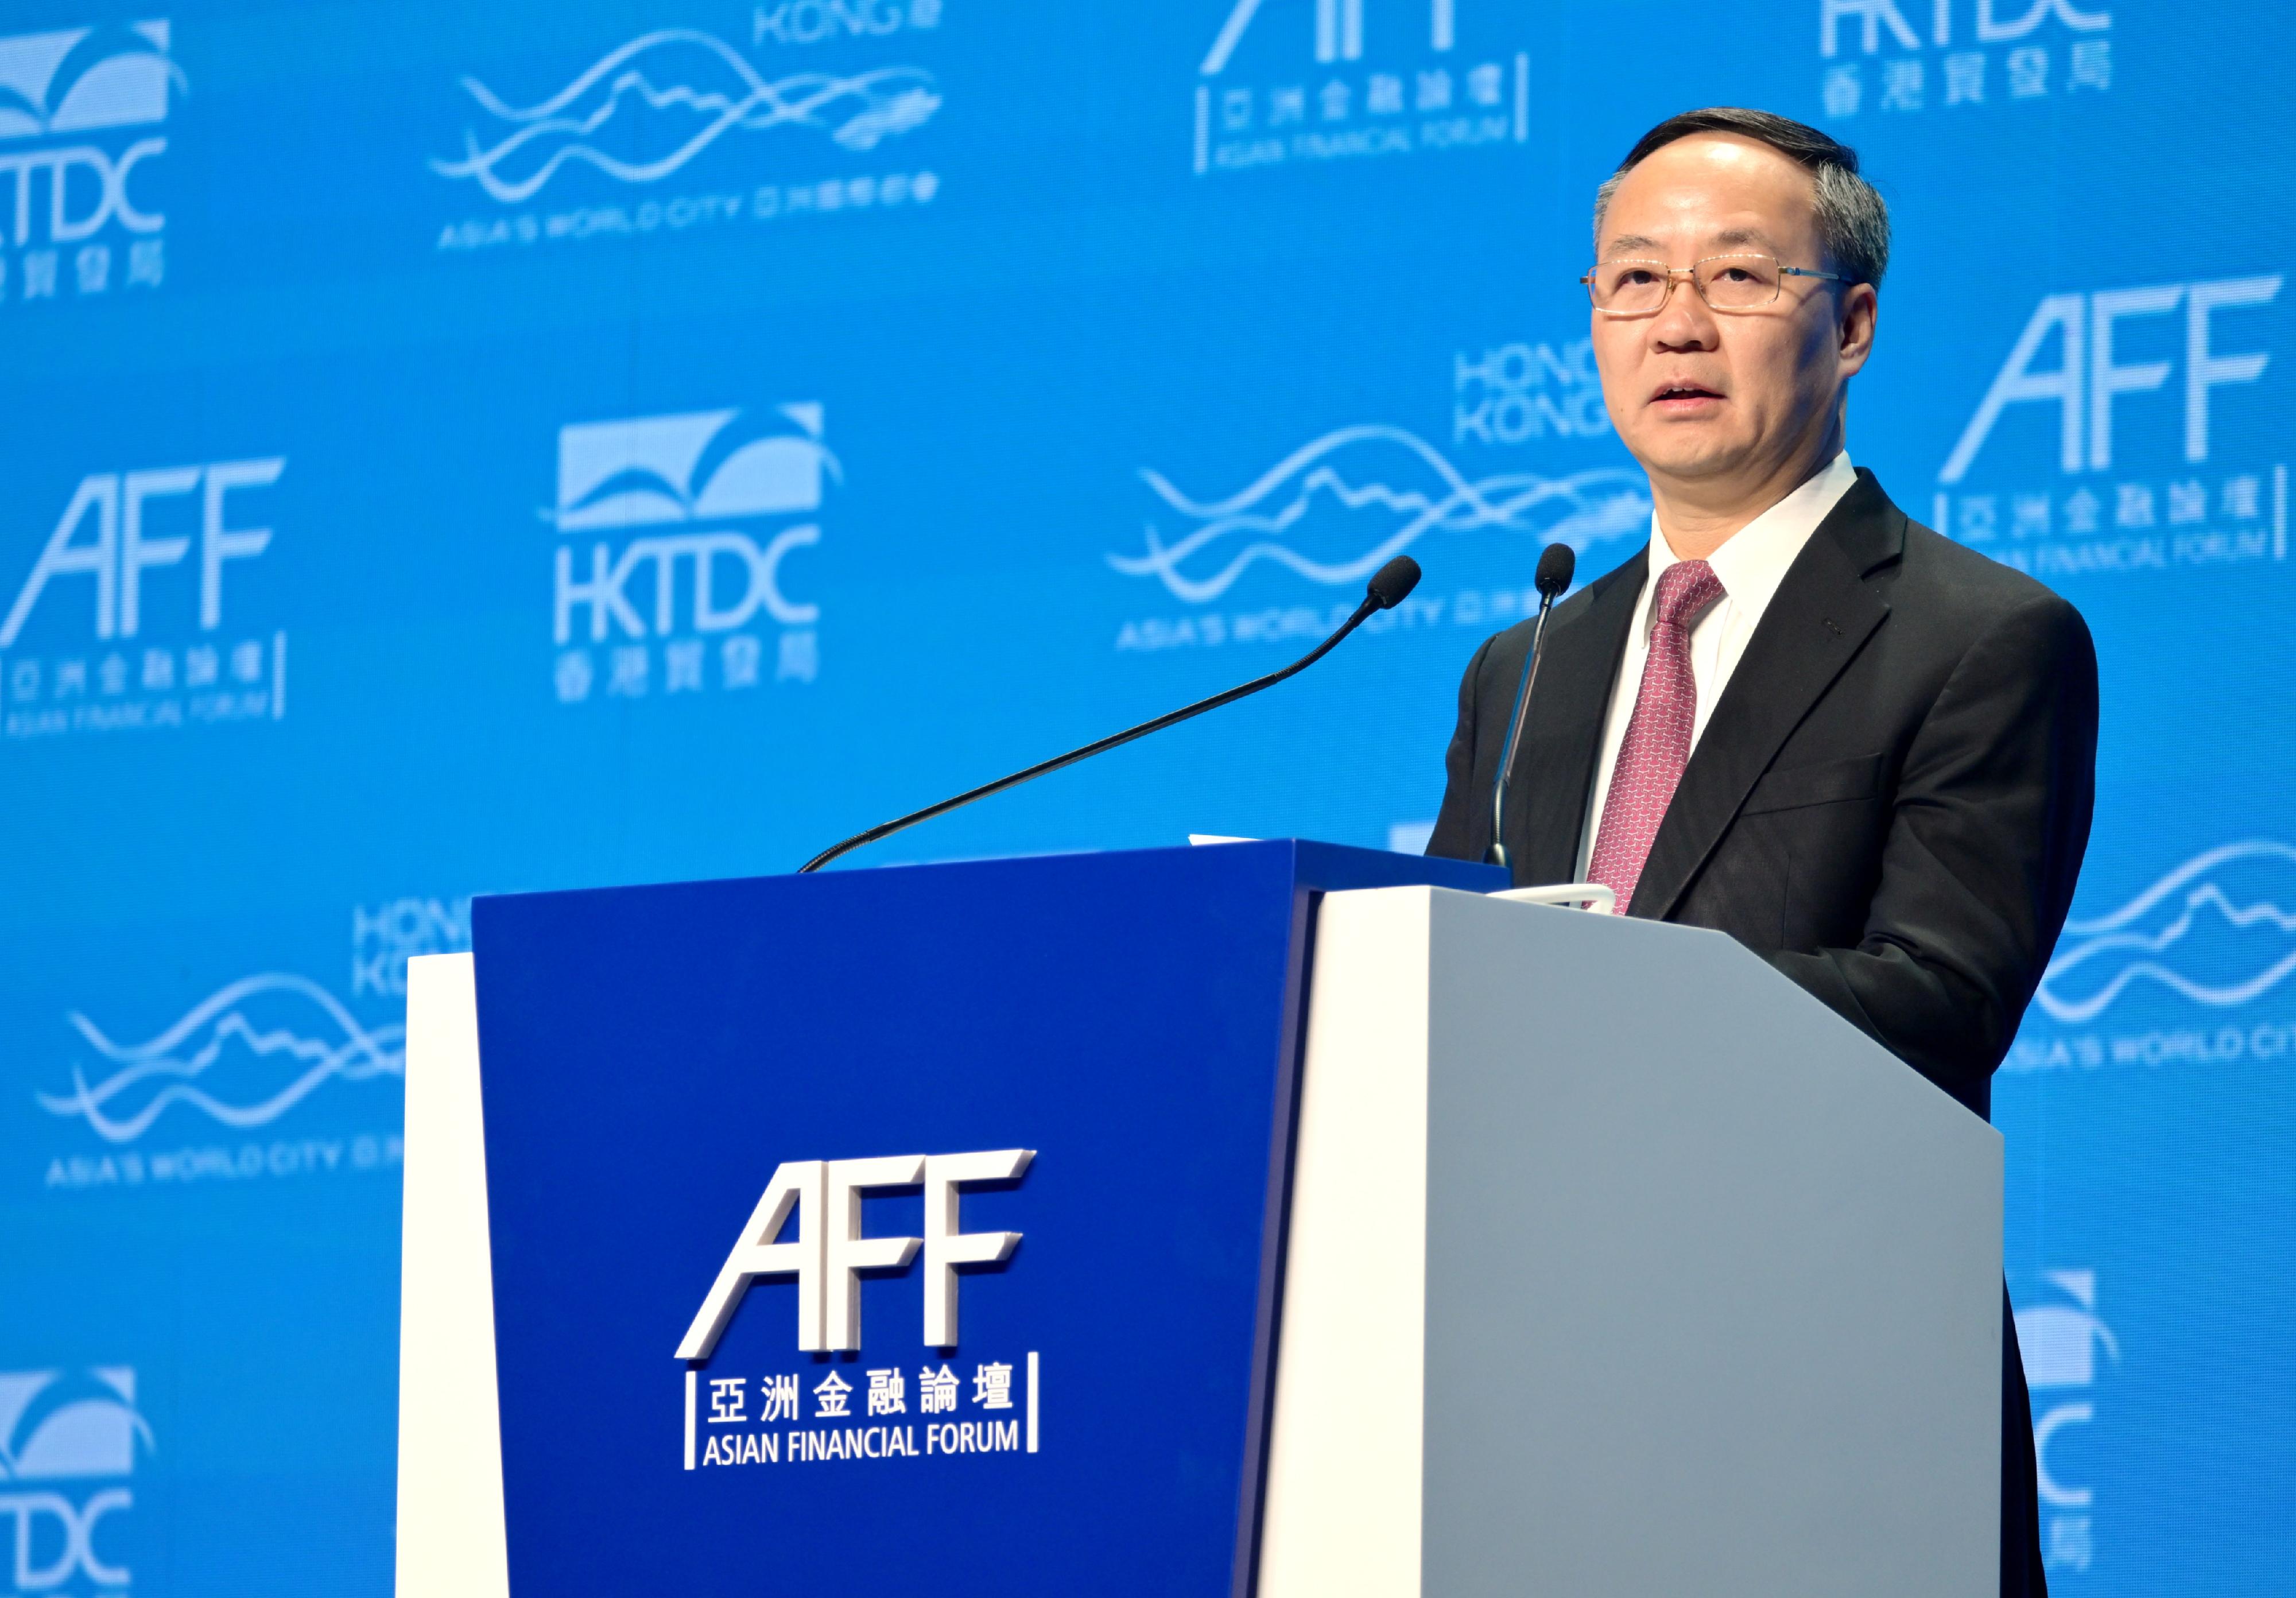 The Minister of the National Financial Regulatory Administration, Mr Li Yunze, delivers special remarks at the Asian Financial Forum today (January 24).